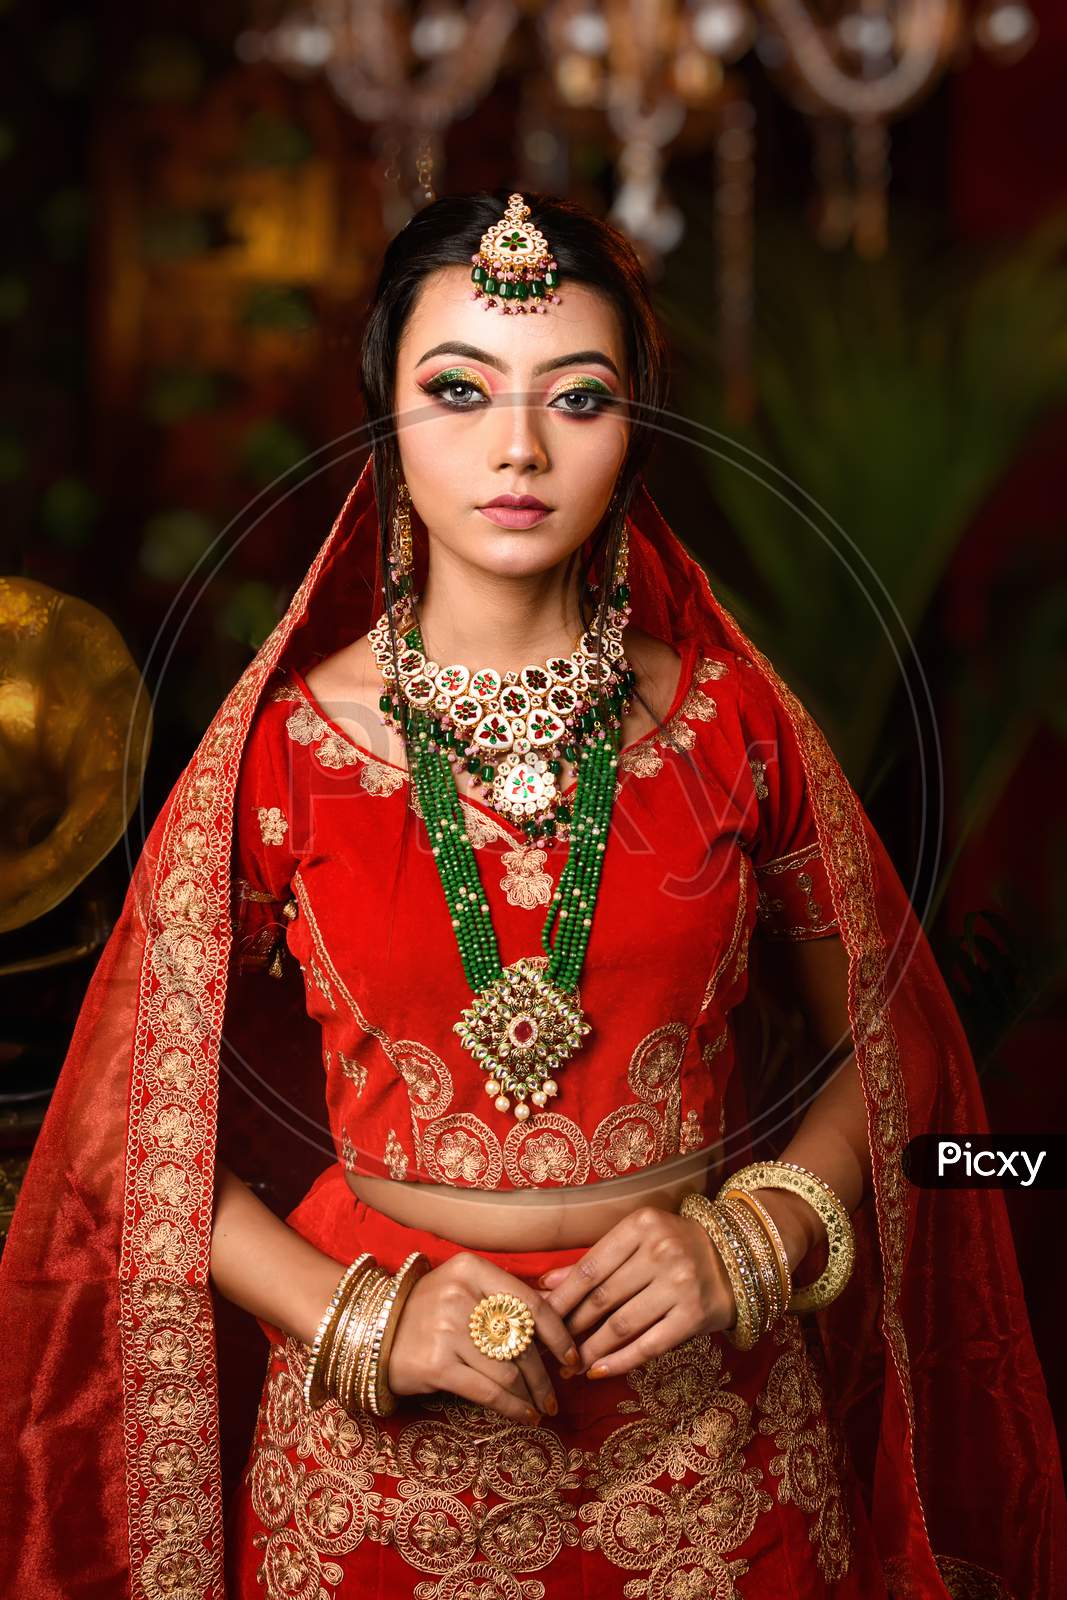 Magnificent Young Indian Bride In Luxurious Bridal Costume With Makeup And Heavy Jewellery With Classic Vintage Interior In Studio Lighting. Wedding Lifestyle And Fashion